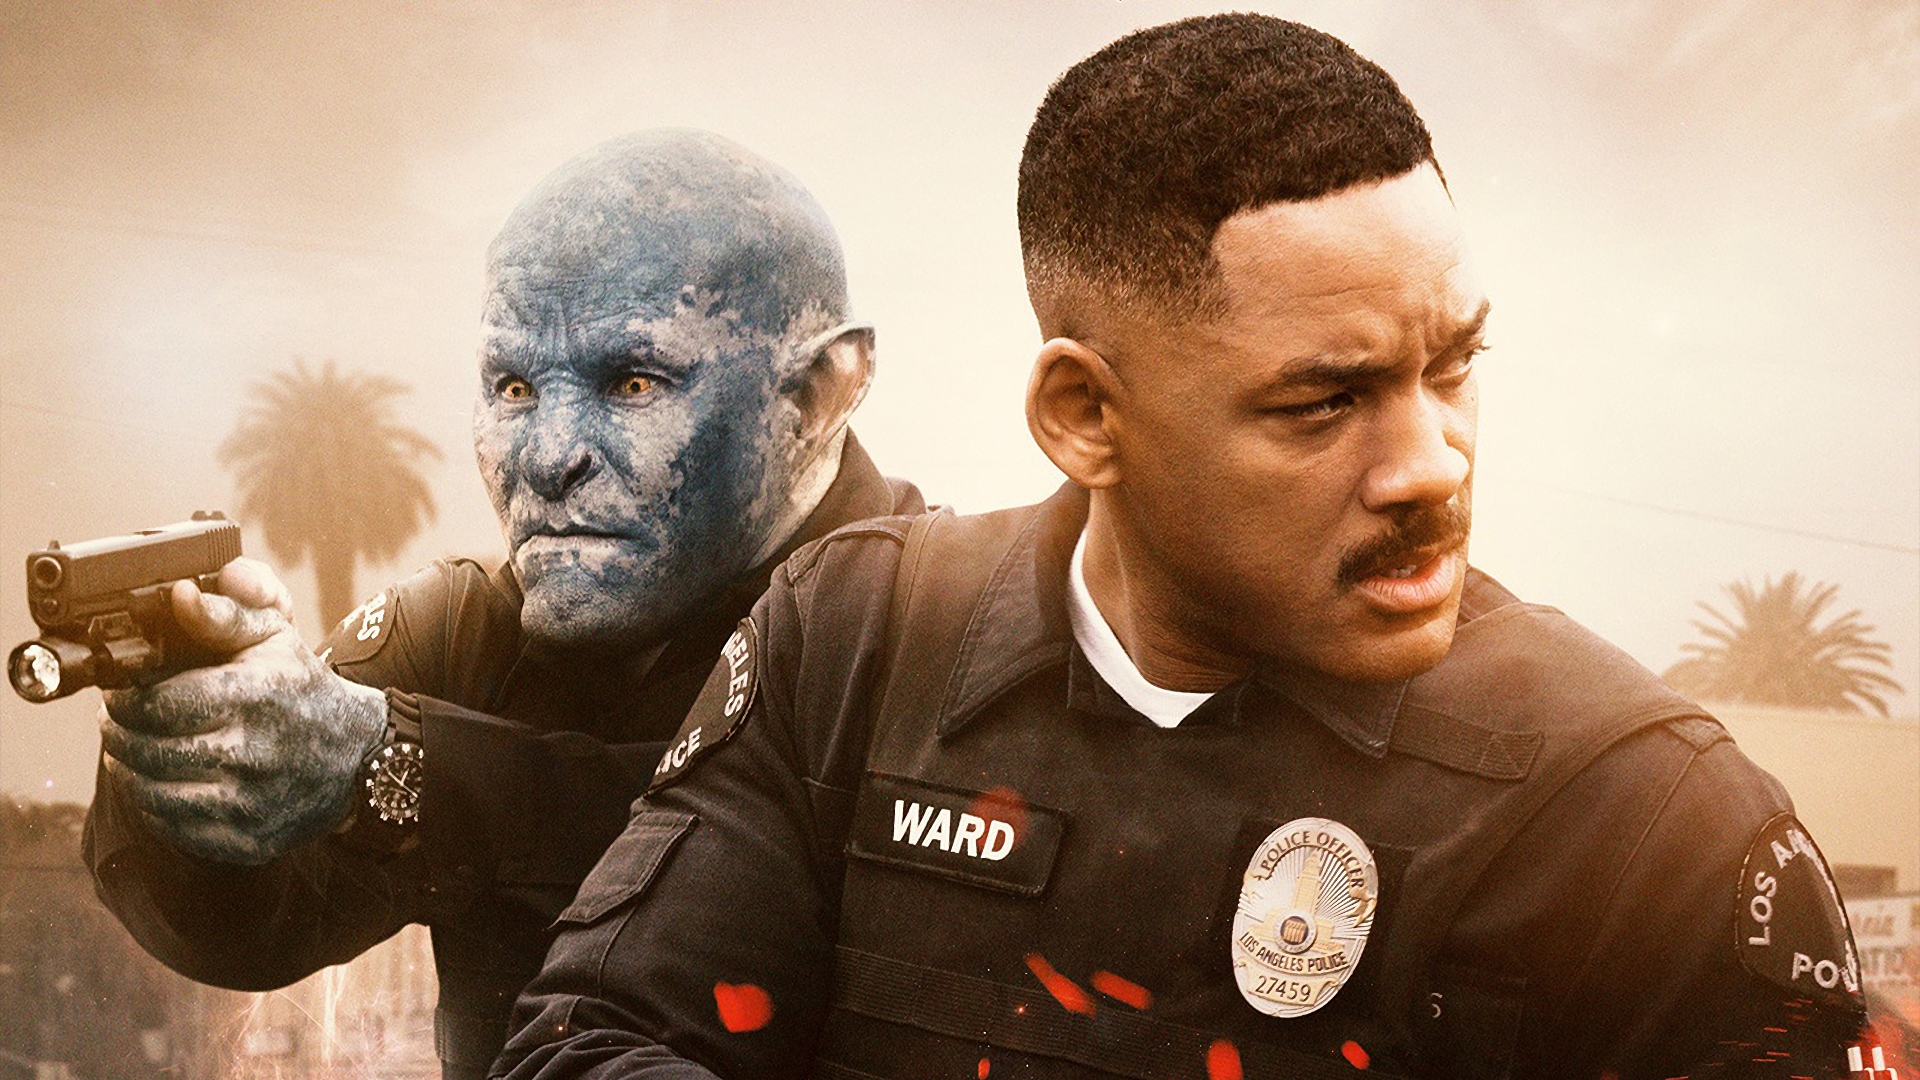 I think we might be in a Prophecy': A Review of Bright – Neon Dystopia